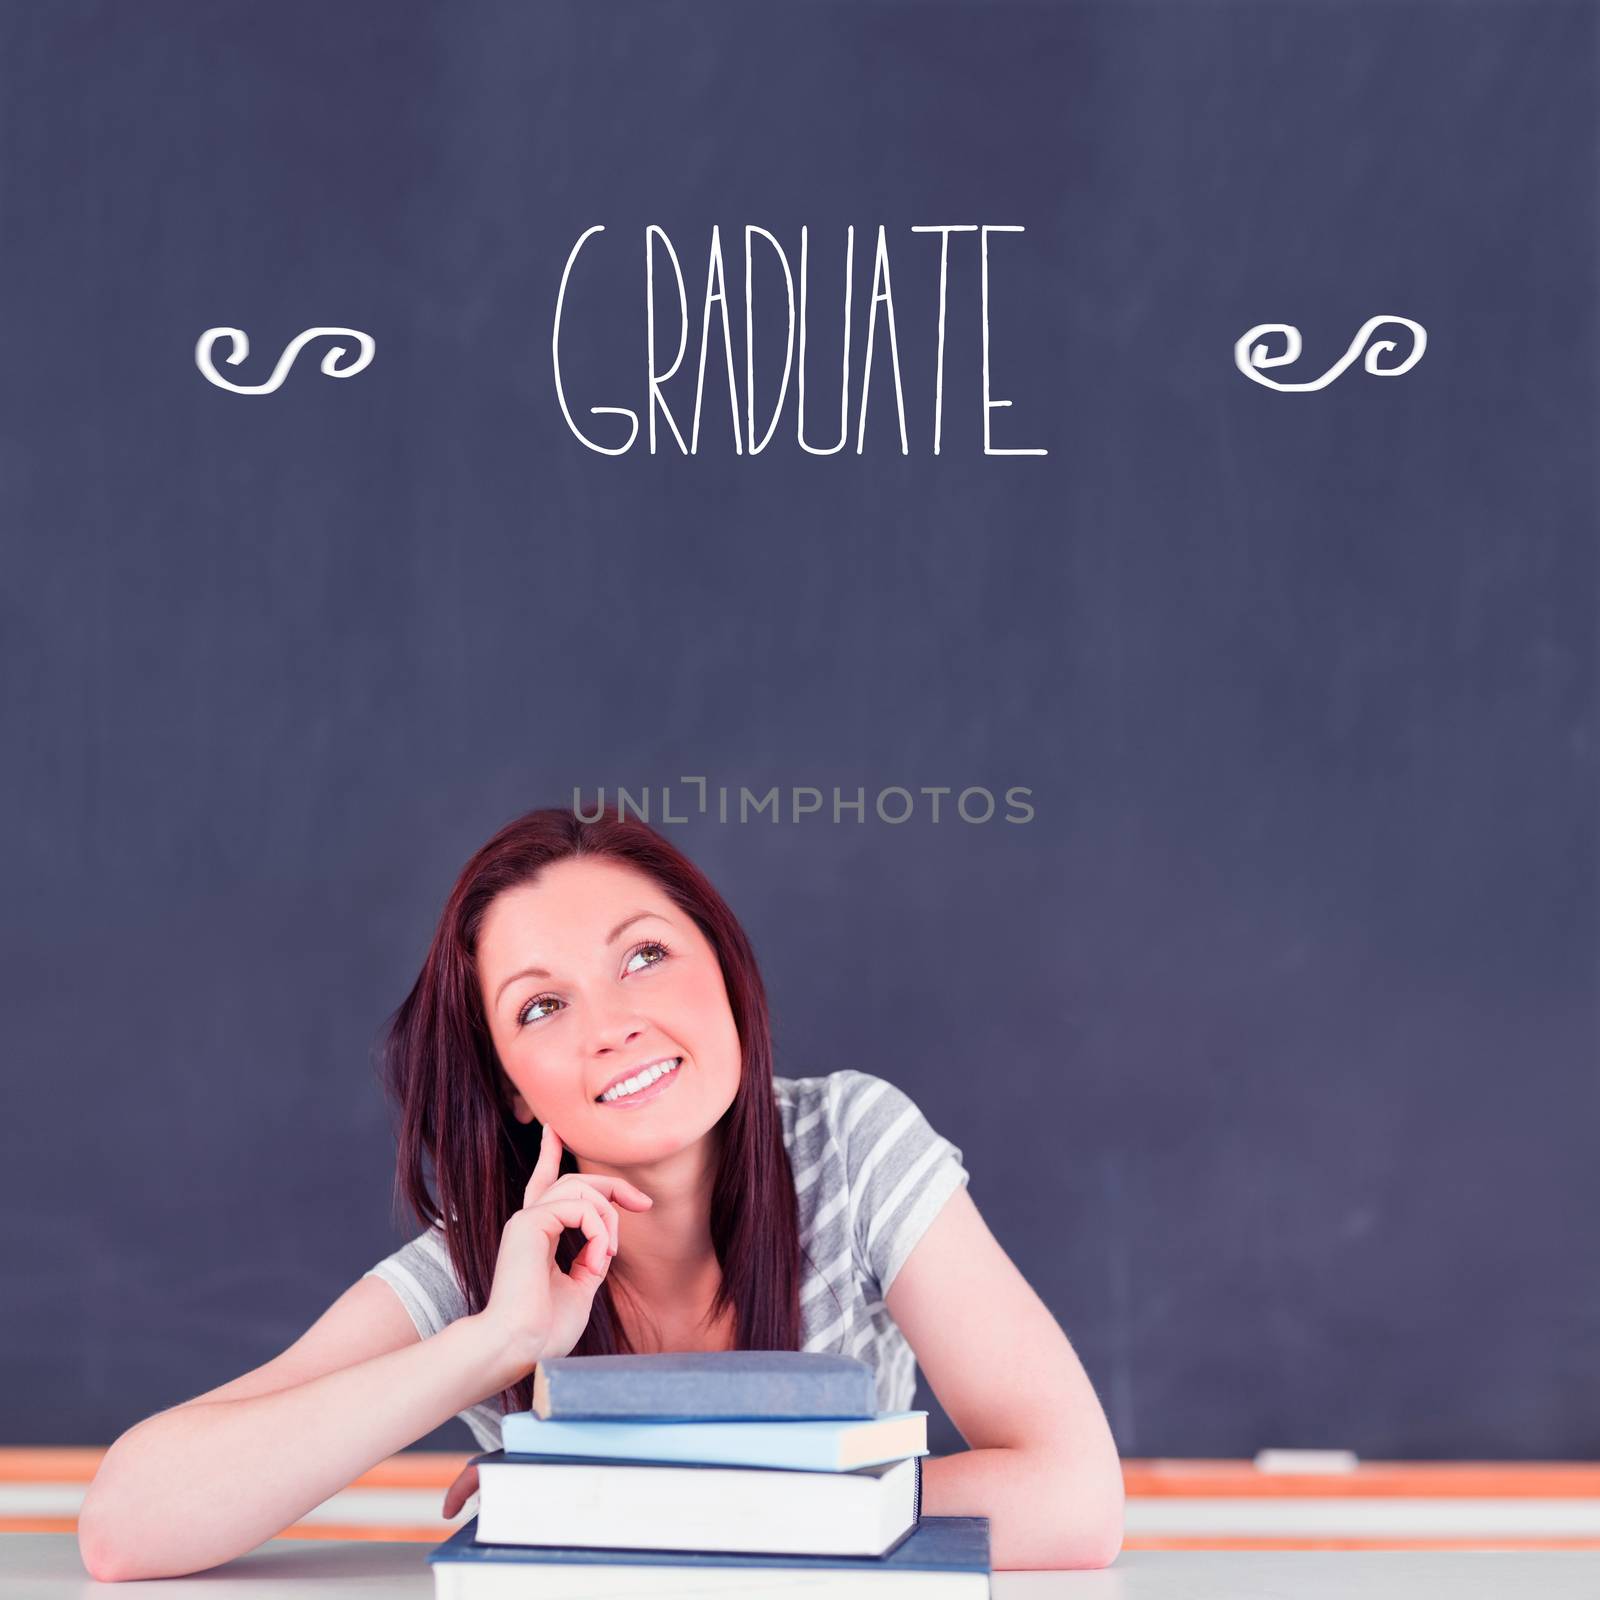 Graduate against student thinking in classroom by Wavebreakmedia